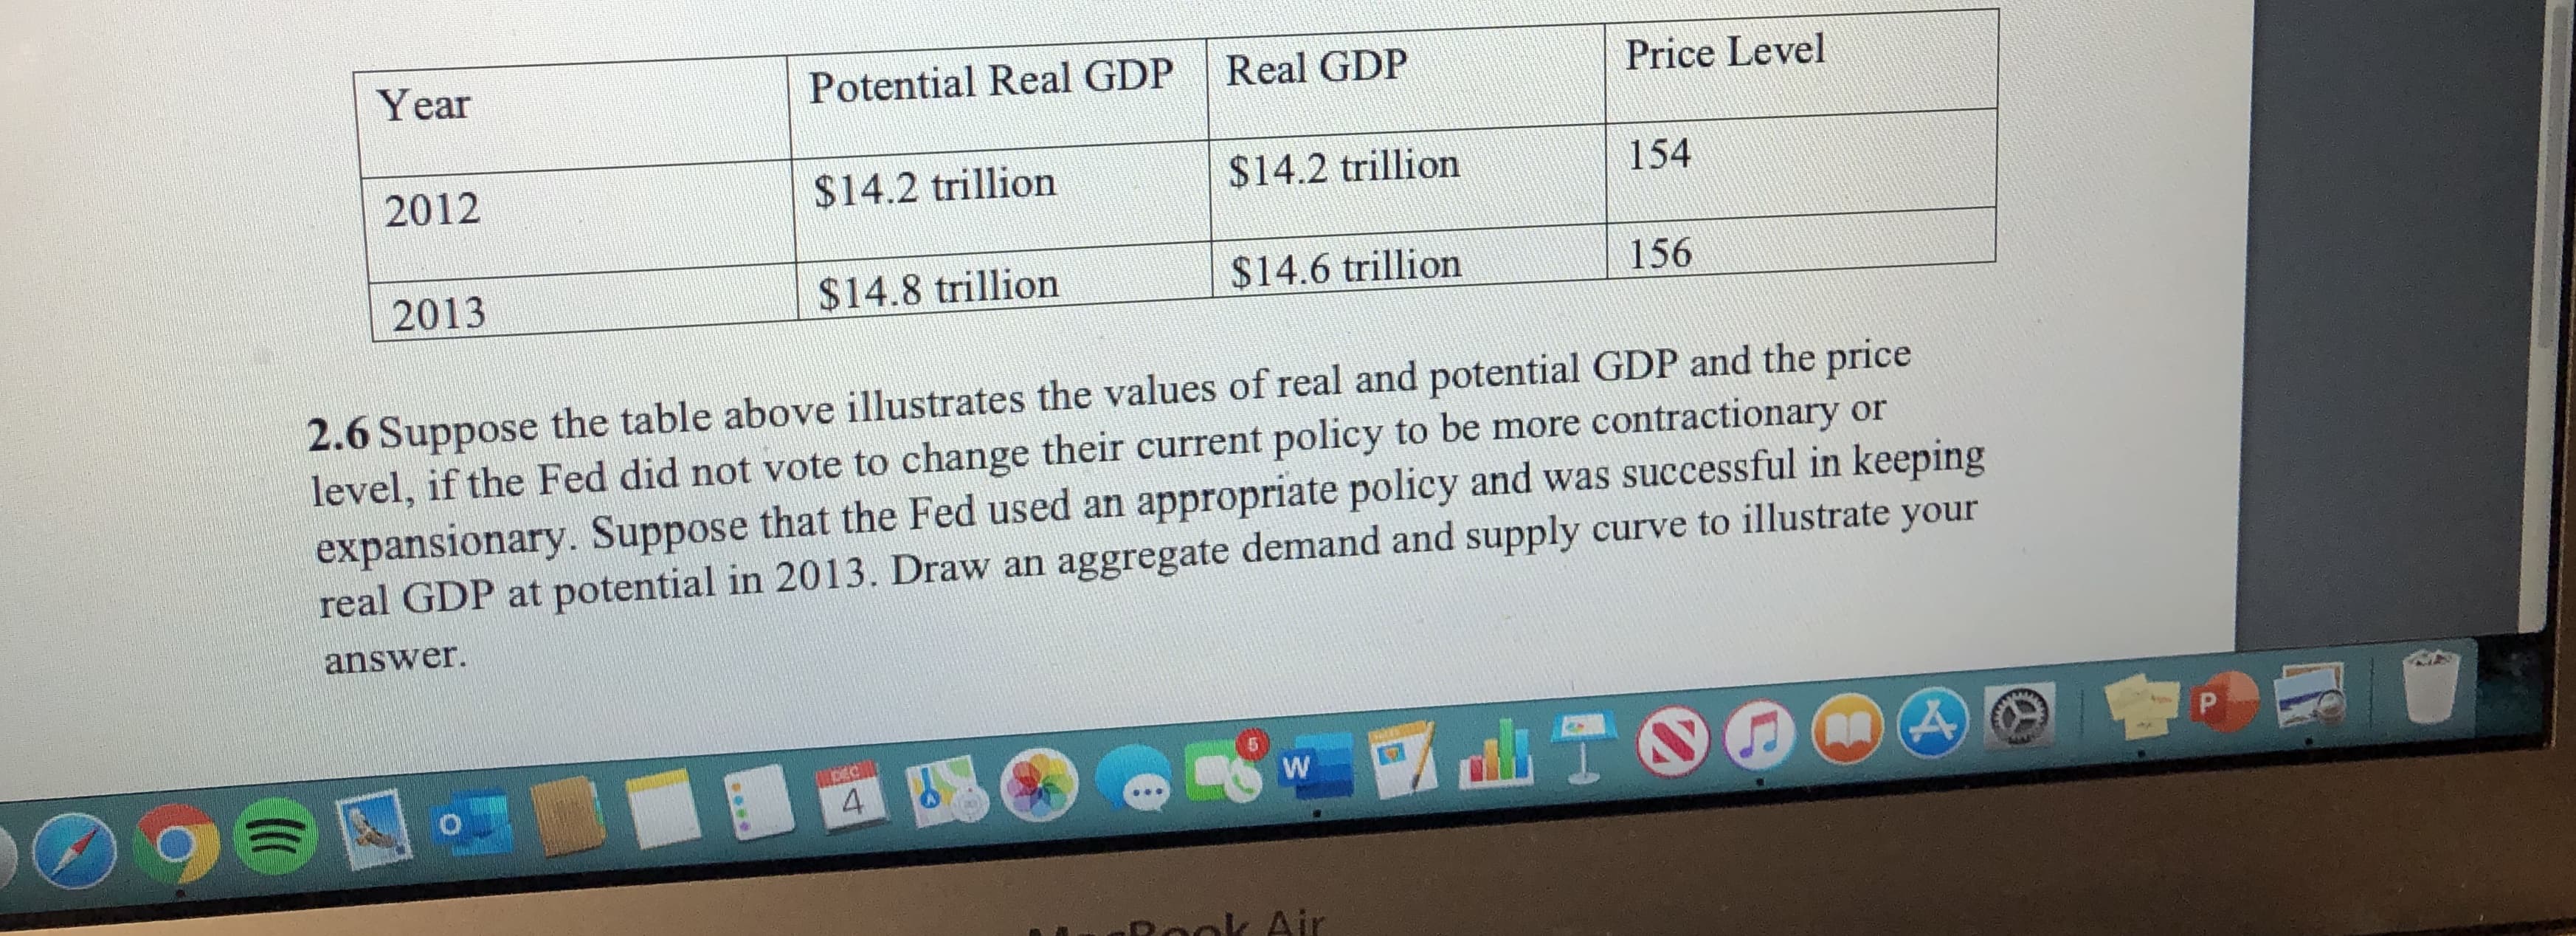 Year
Potential Real GDP
Real GDP
Price Level
2012
$14.2 trillion
$14.2 trillion
154
$14.6 trillion
156
$14.8 trillion
2013
2.6 Suppose the table above illustrates the values of real and potential GDP and the price
level, if the Fed did not vote to change their current policy to be more contractionary or
expansionary. Suppose that the Fed used an appropriate policy and was successful in keeping
real GDP at potential in 2013. Draw an aggregate demand and supply curve to illustrate your
answer.
96
4
Reok Air
